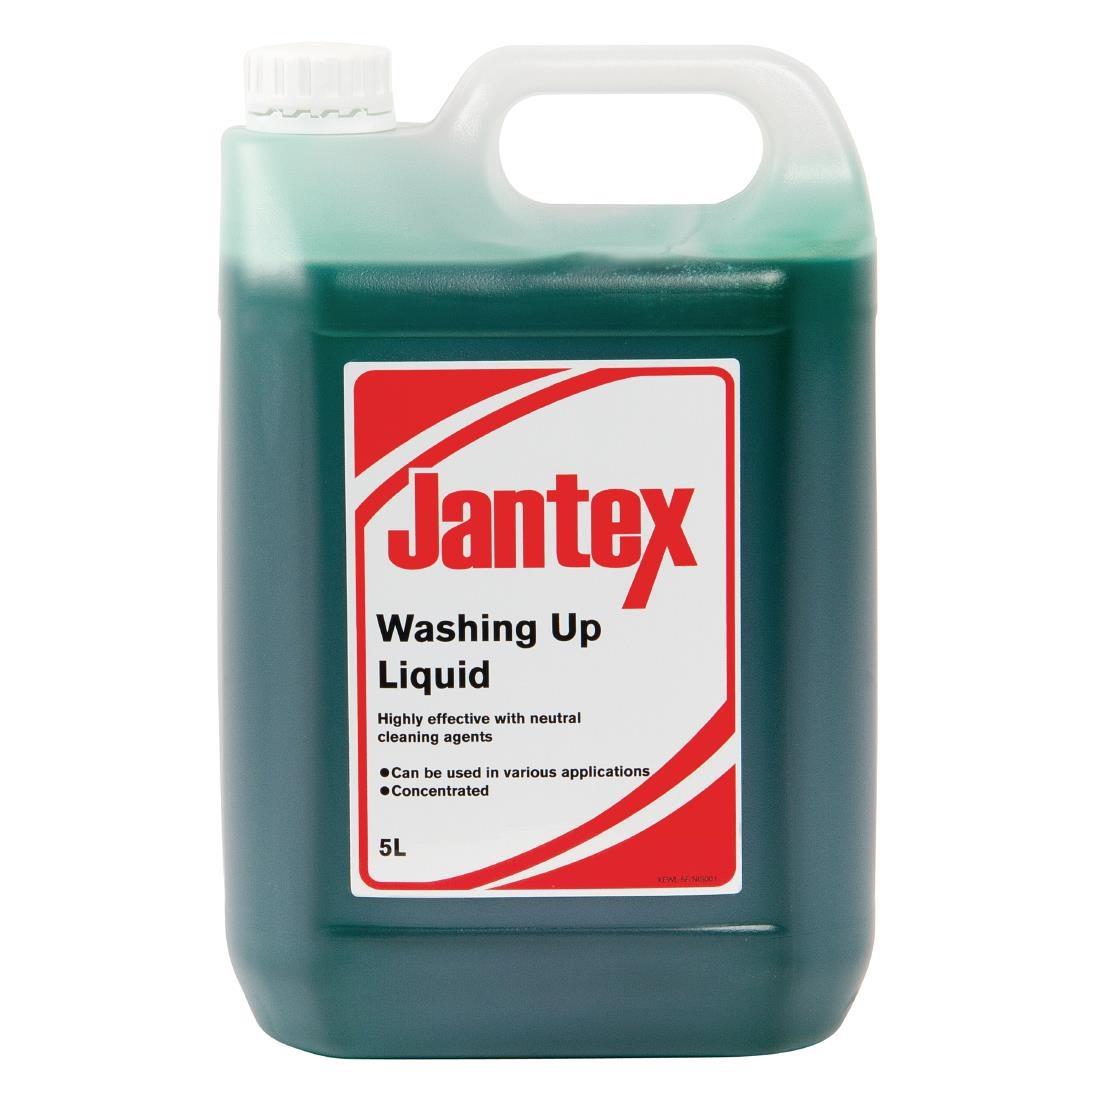 Jantex Washing Up Liquid Concentrate 5Ltr (Twin Pack) - CW706  - 1